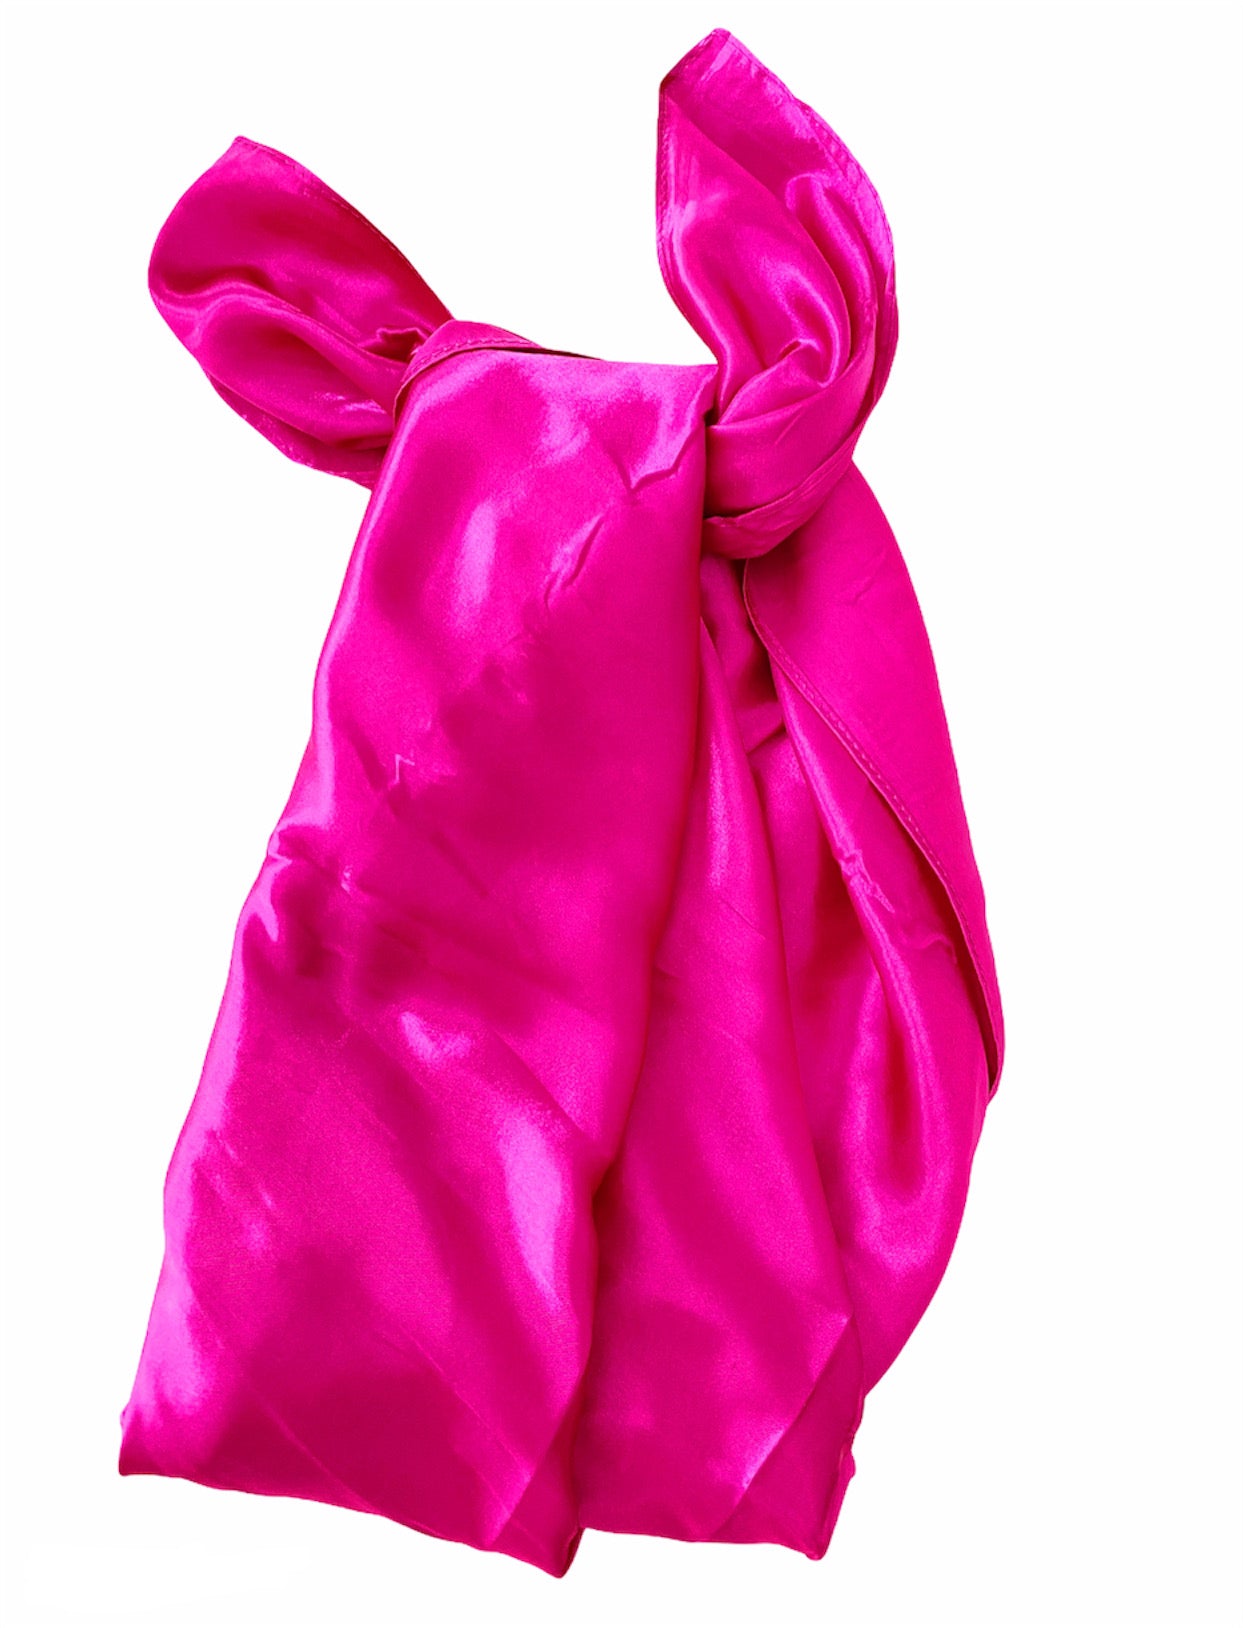 Hot pink scarf top